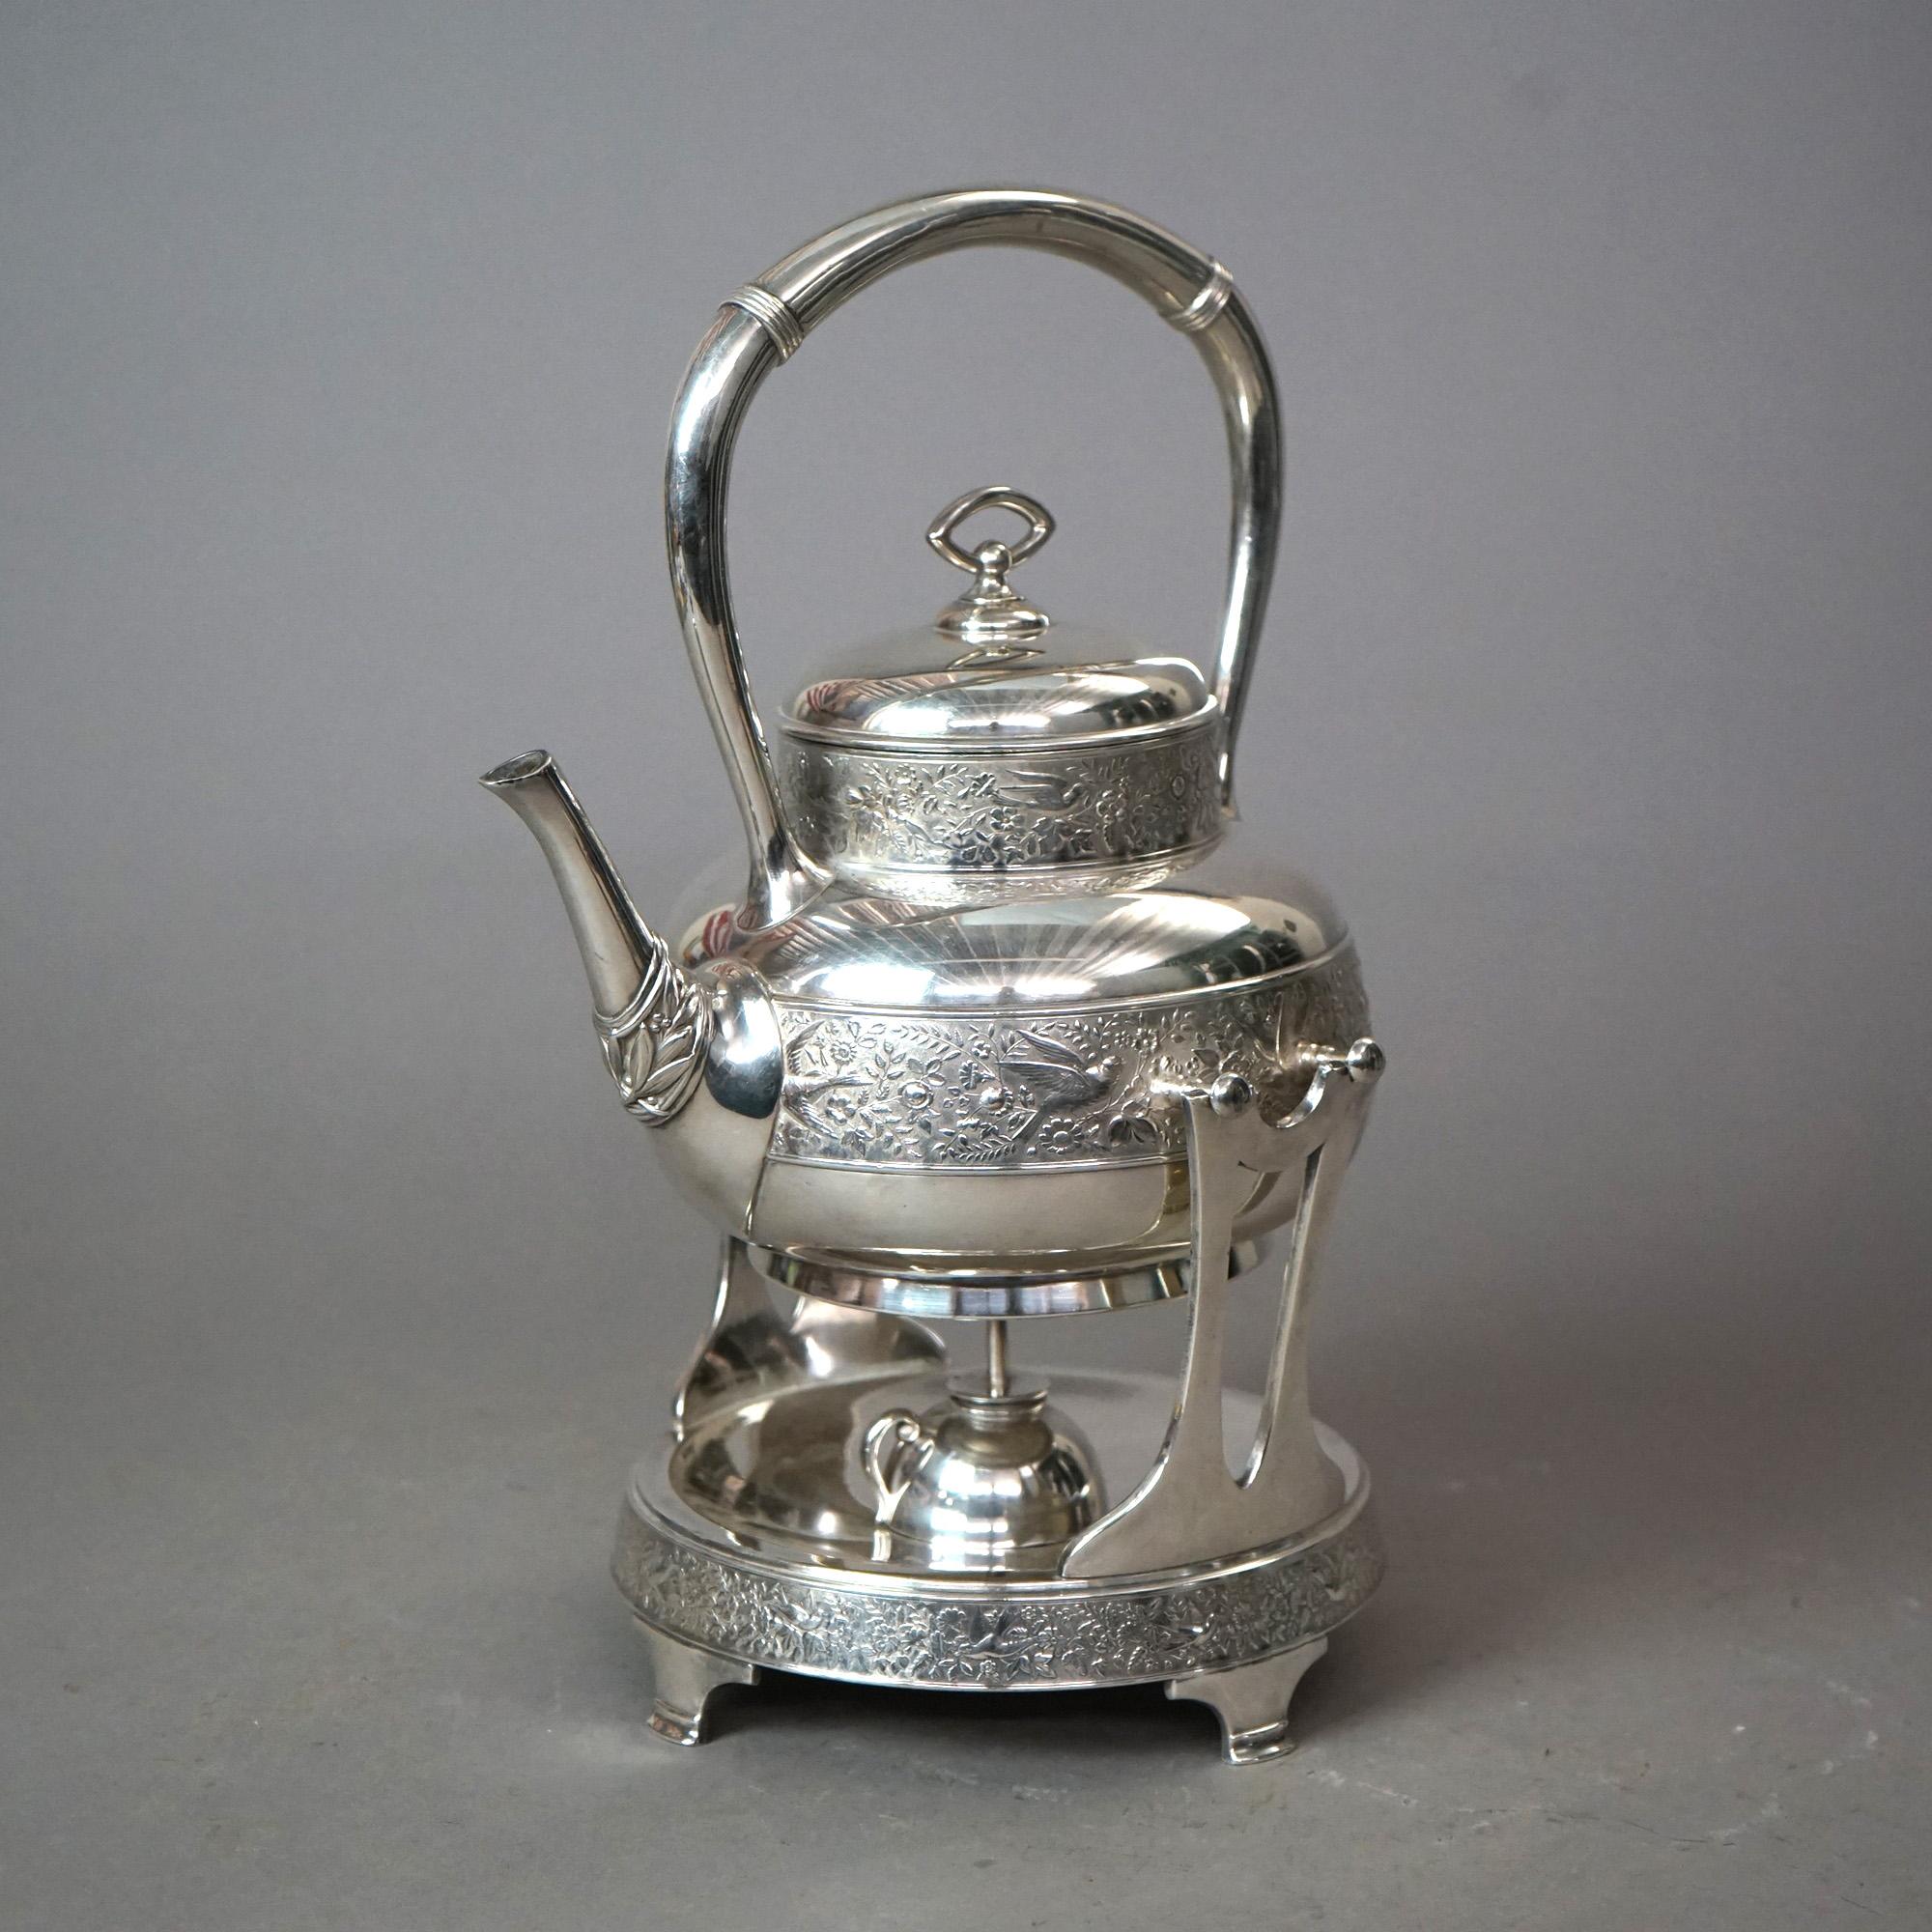 American Antique Rogers Aesthetic Silver Plated Tilting Teapot & Stand with Birds C1870 For Sale